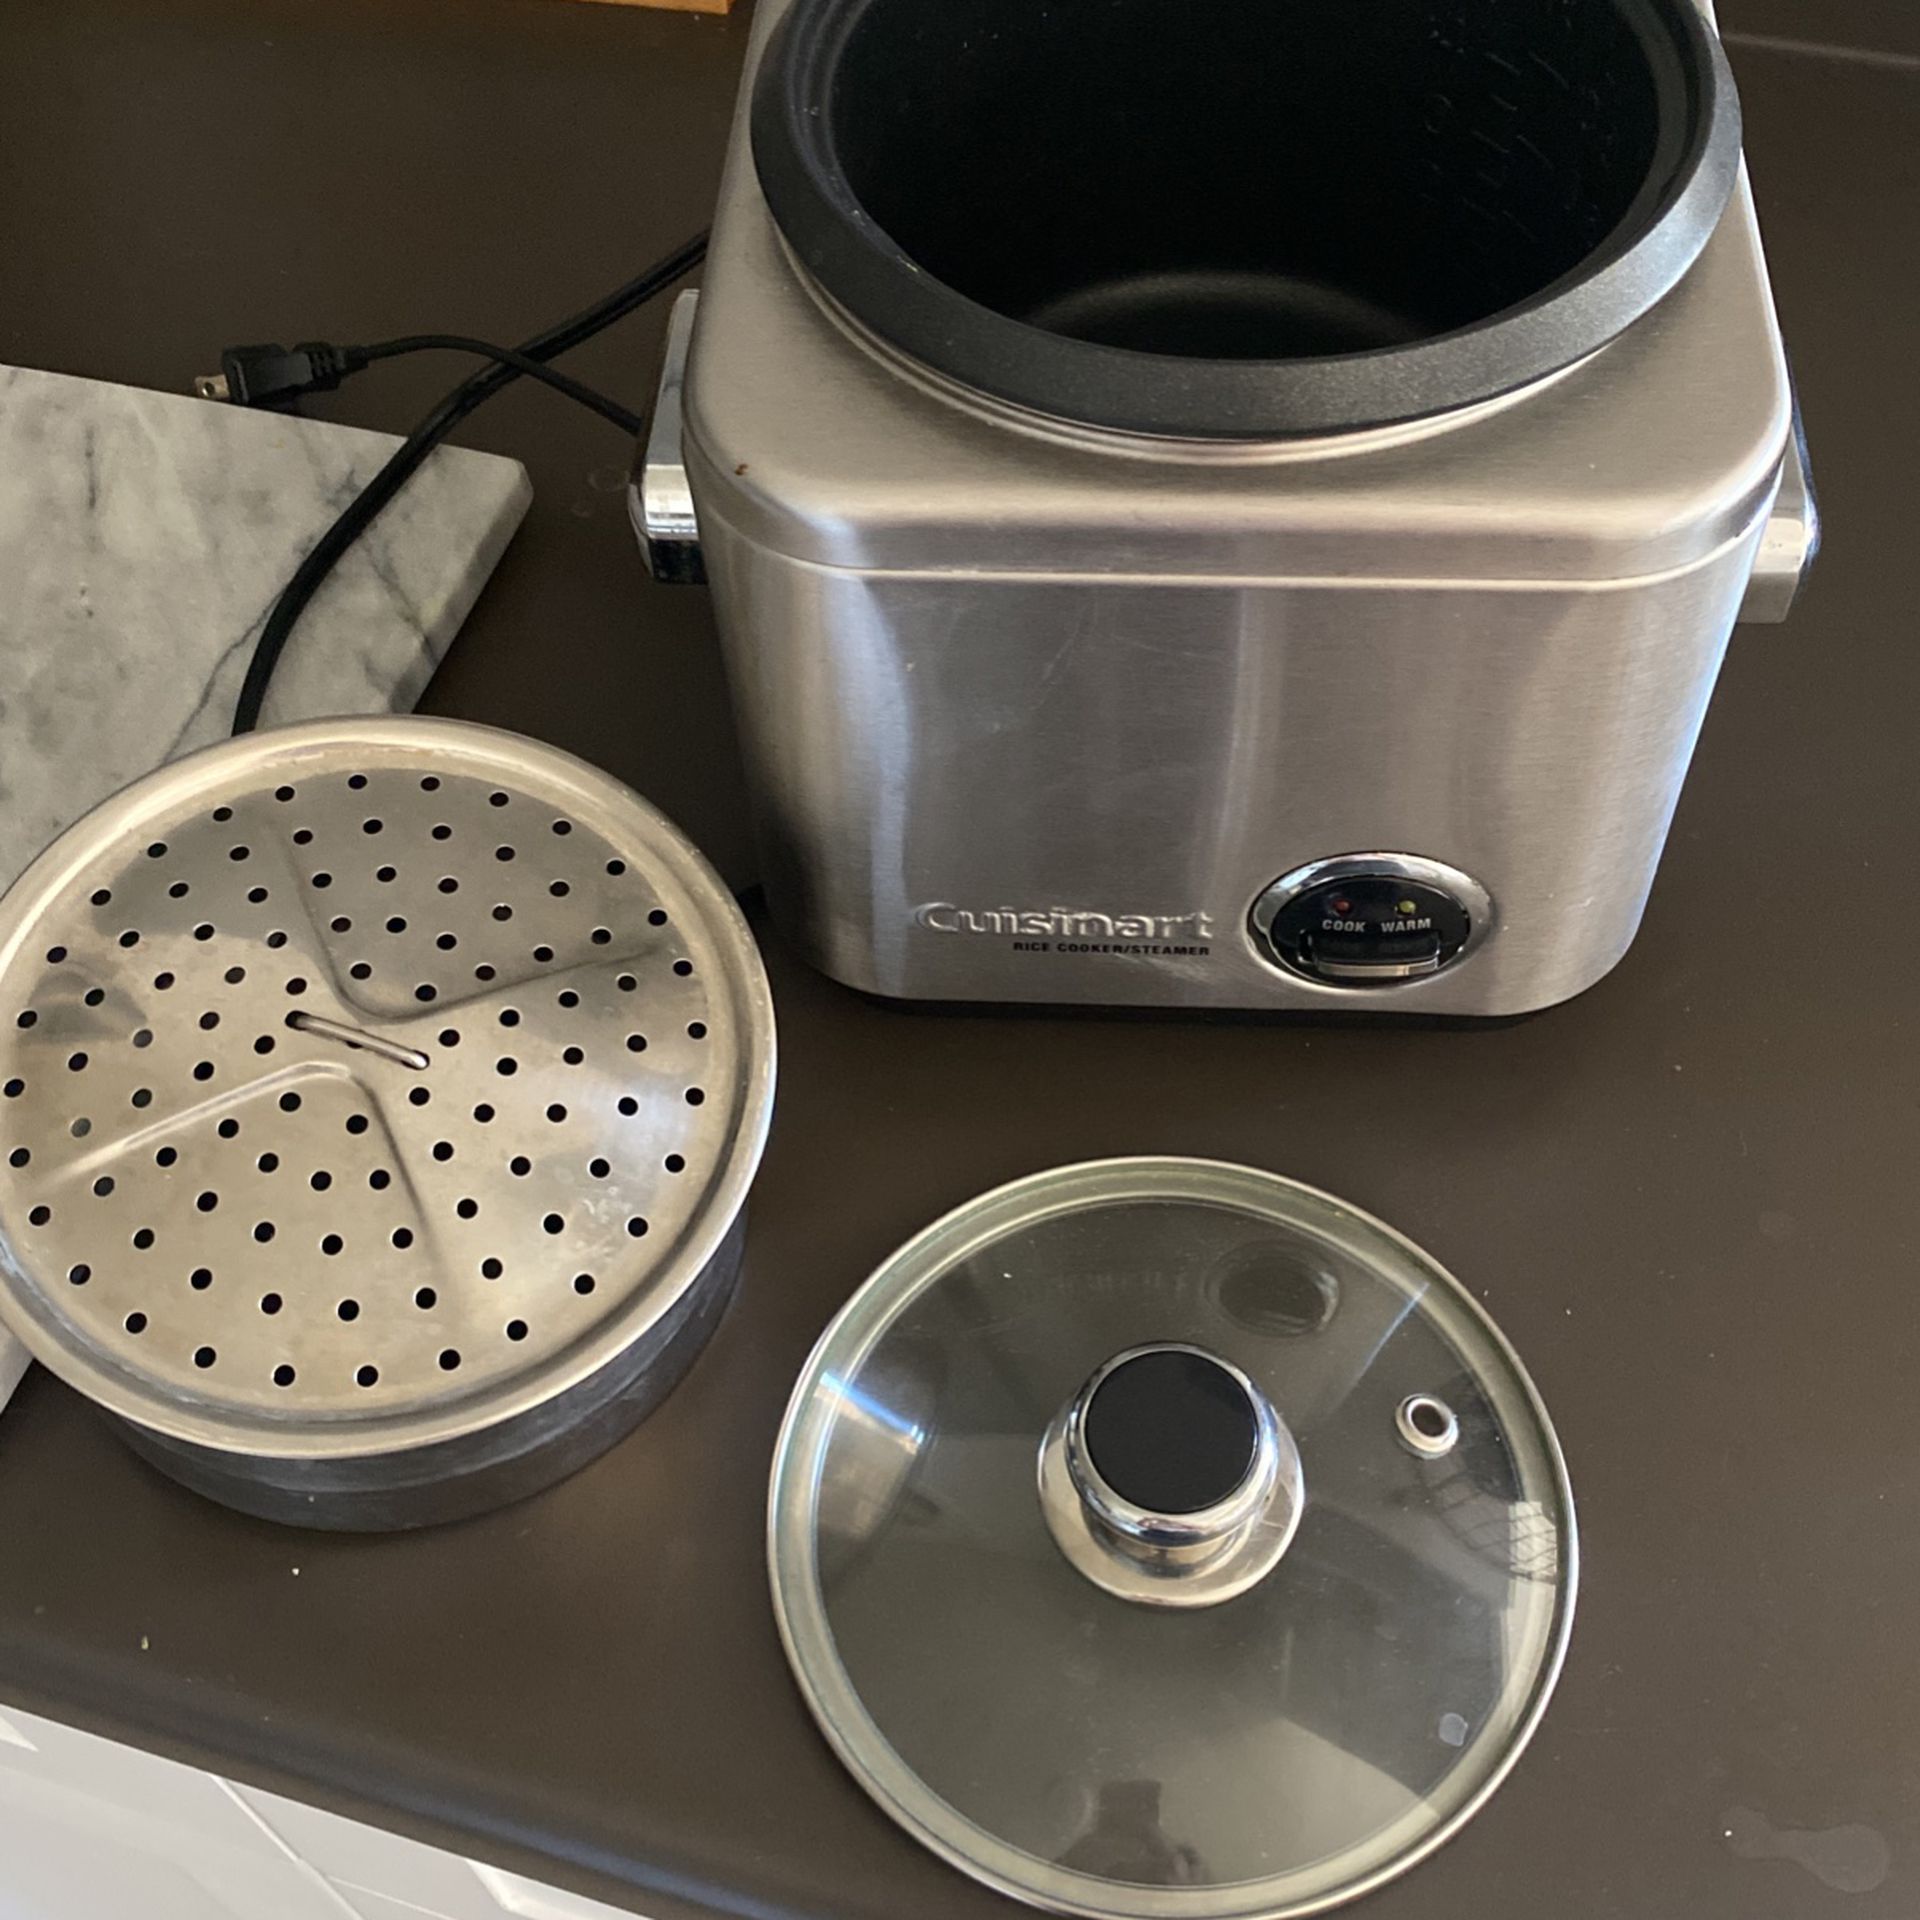 PARS KHAZAR Automatic Rice Cooker 4 Cup for Sale in San Diego, CA - OfferUp